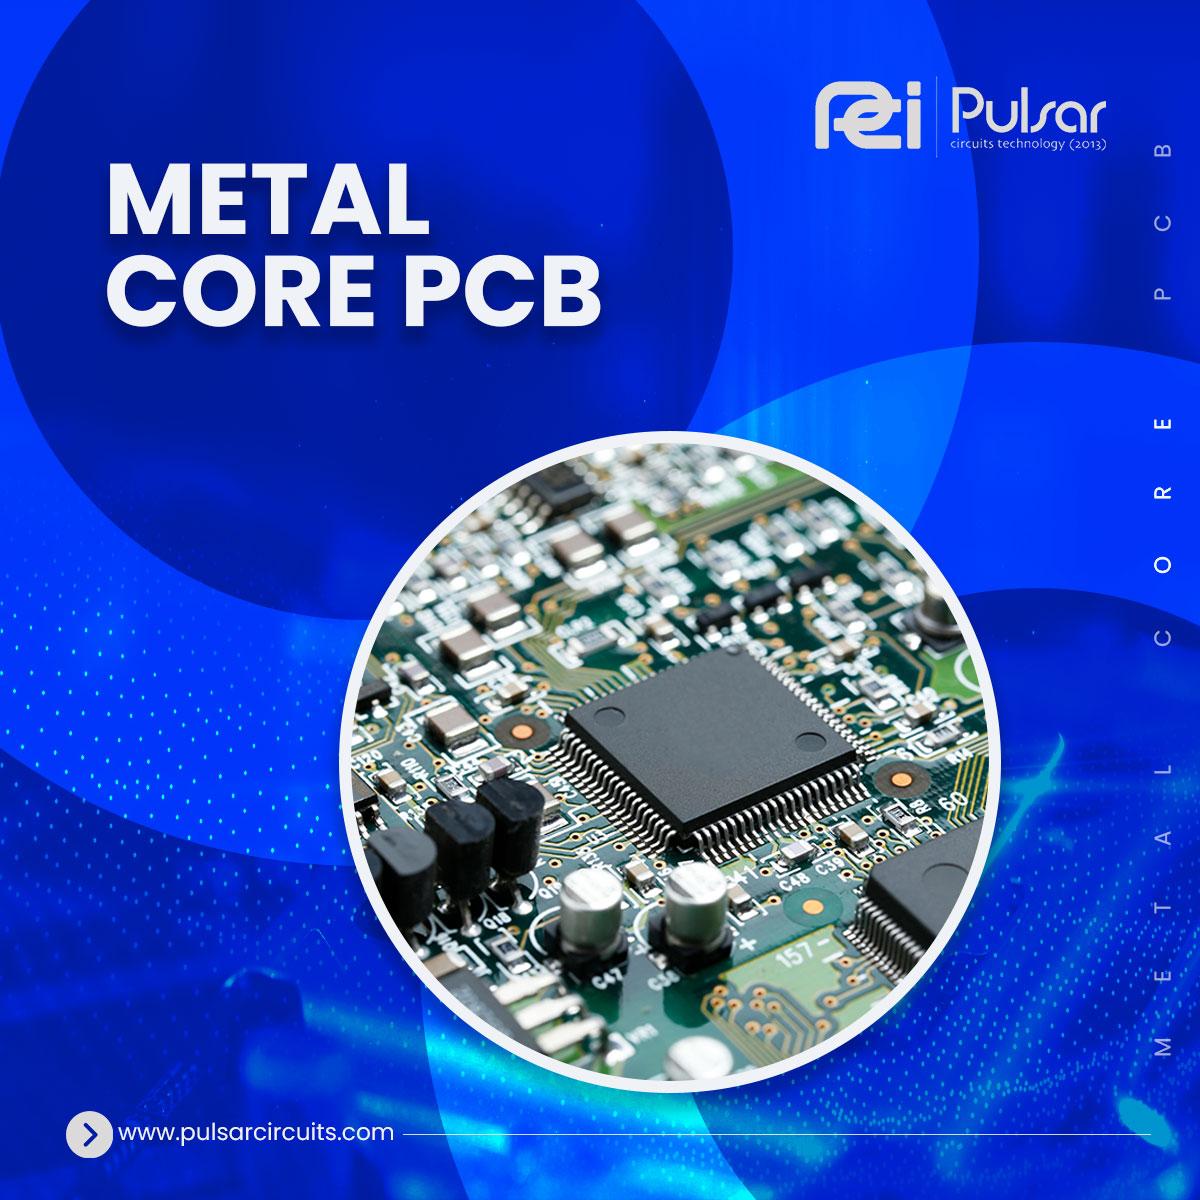 Factors to Consider When Choosing a PCB Manufacturer